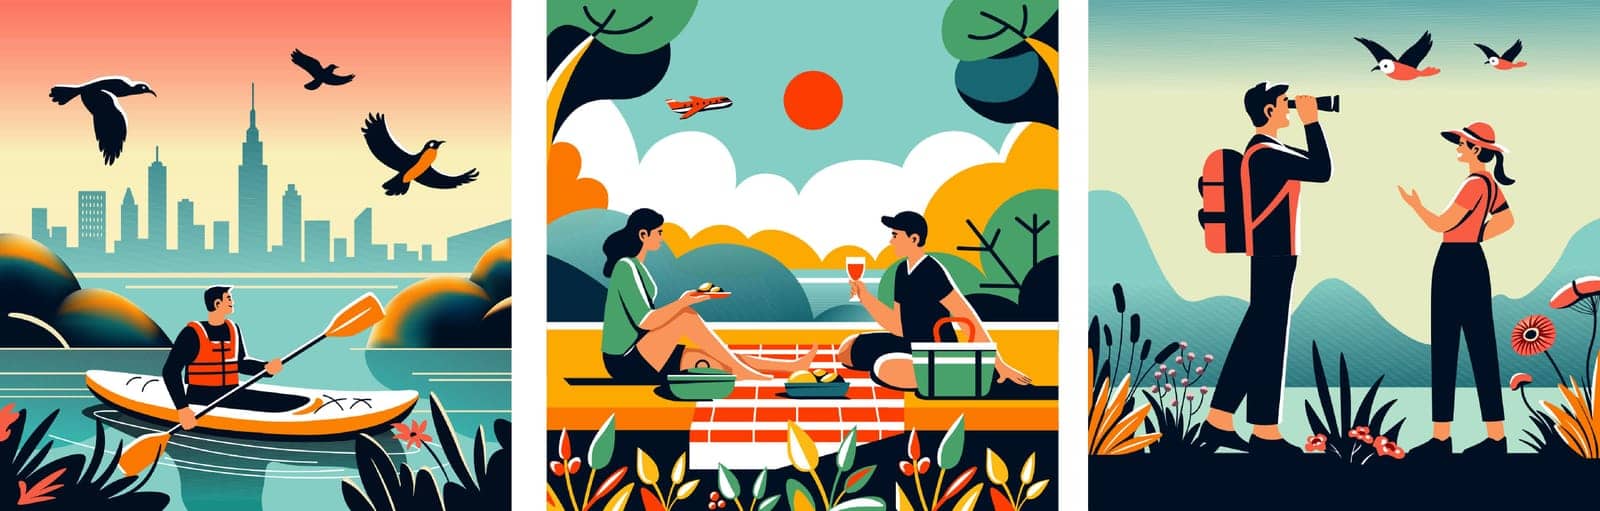 Couples enjoying a city picnic and birdwatching, vector illustration in flat design, reflecting leisure activities in an urban park.